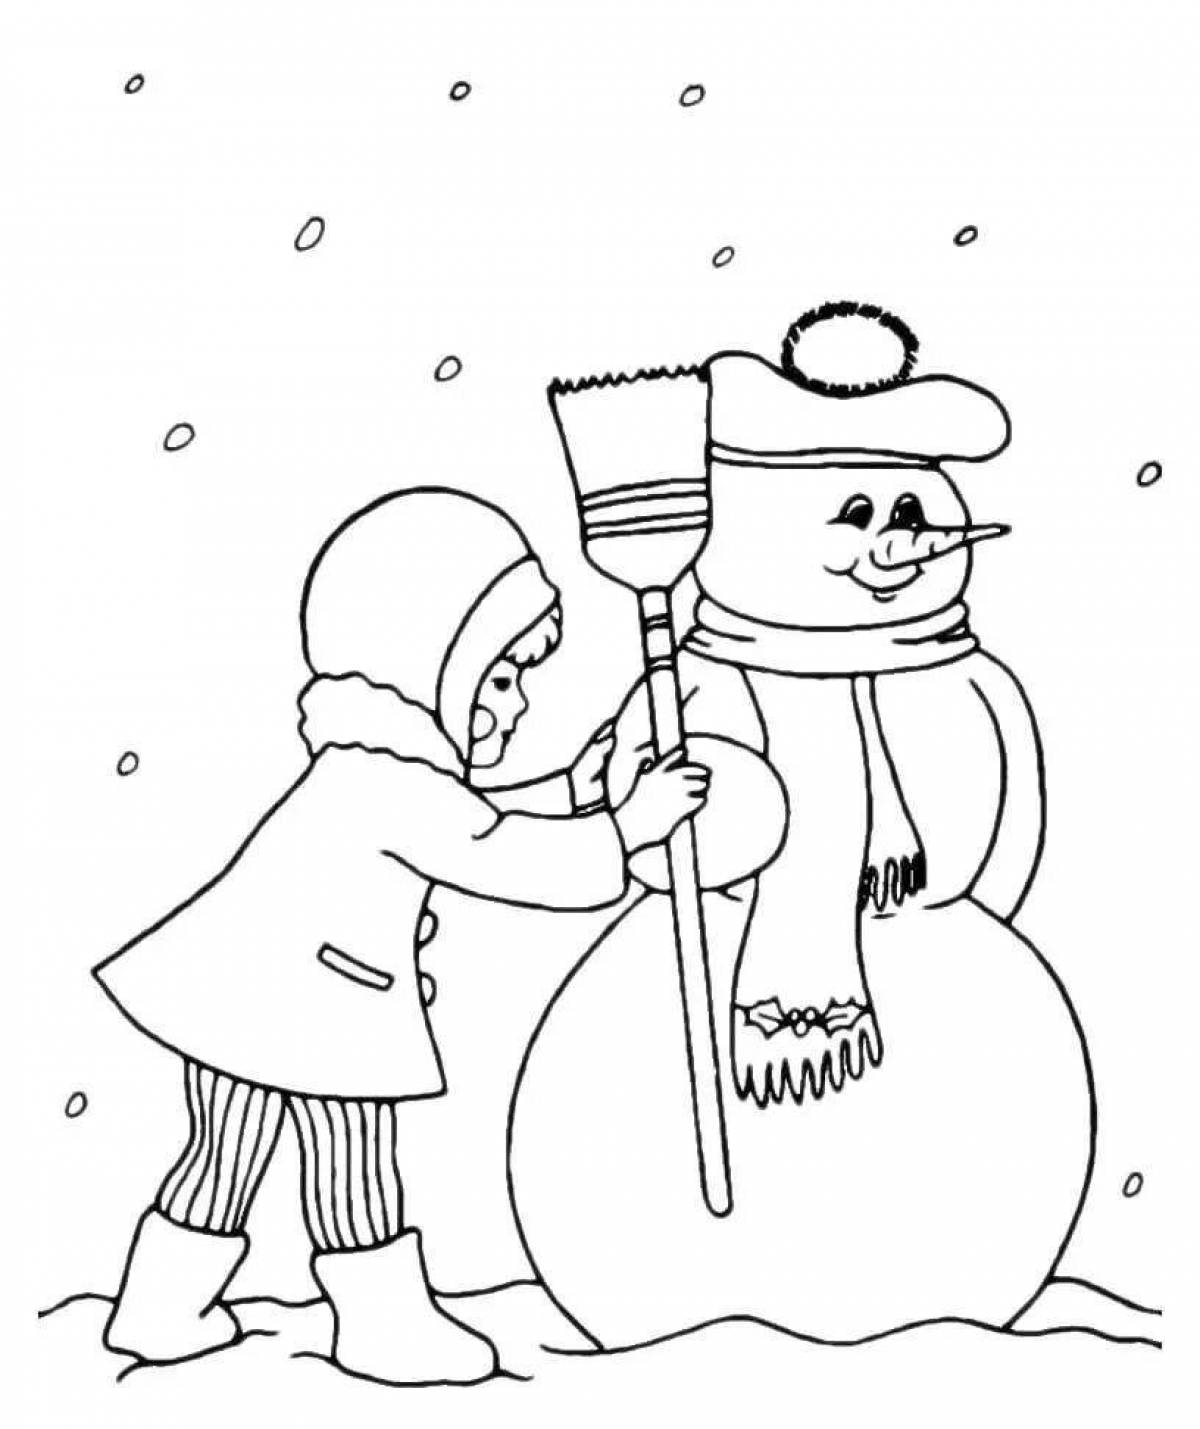 Great snowman coloring book for kids